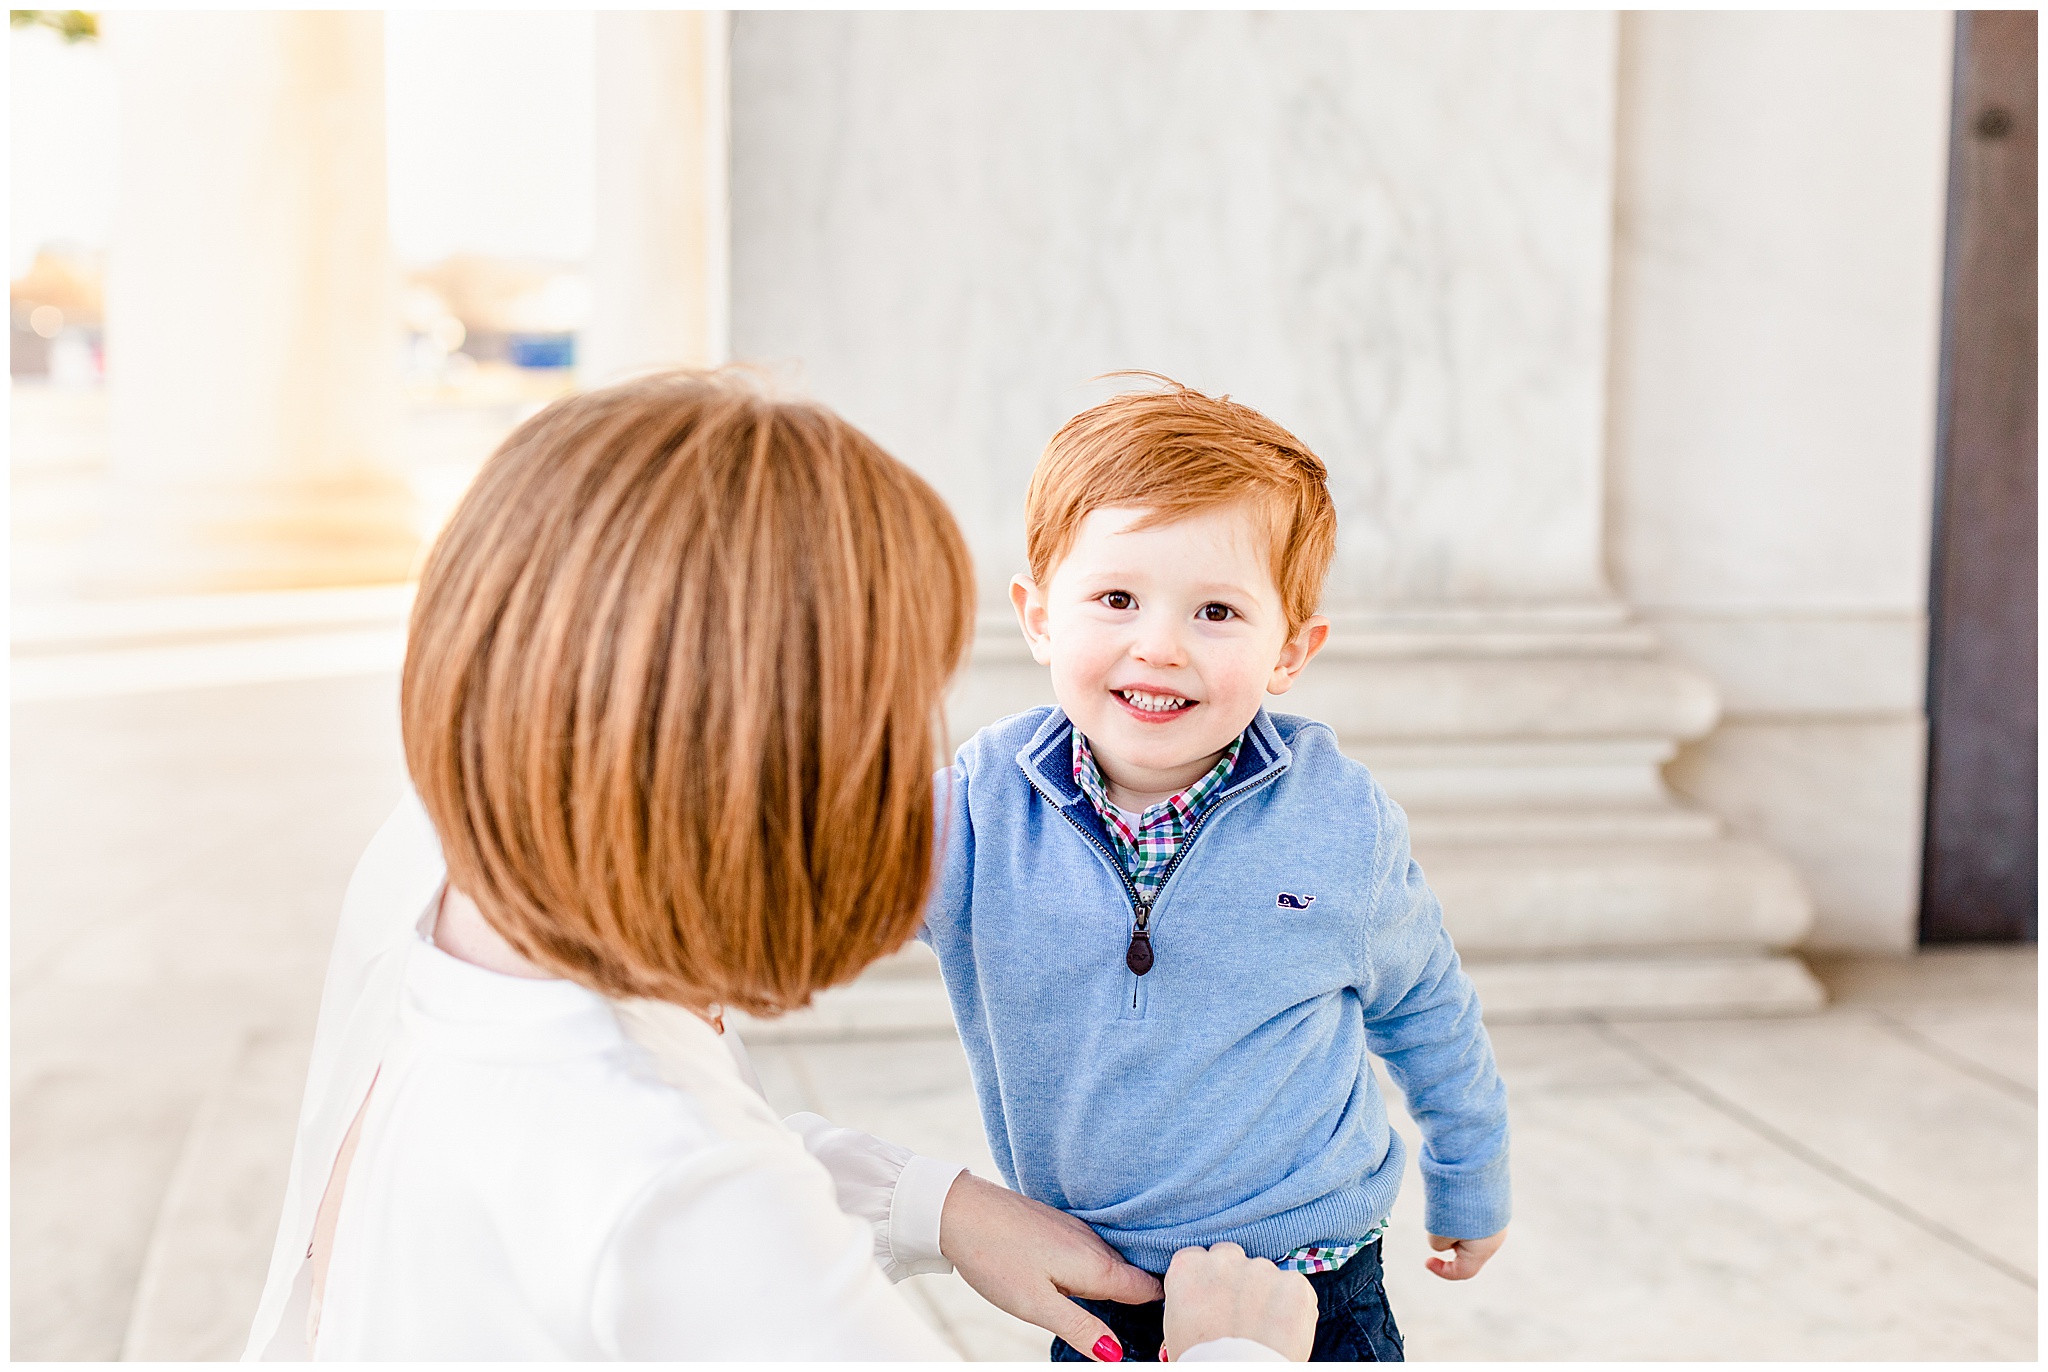 Family Photo Session at the Jefferson Memorial by Washington DC based Kofmehl Photography